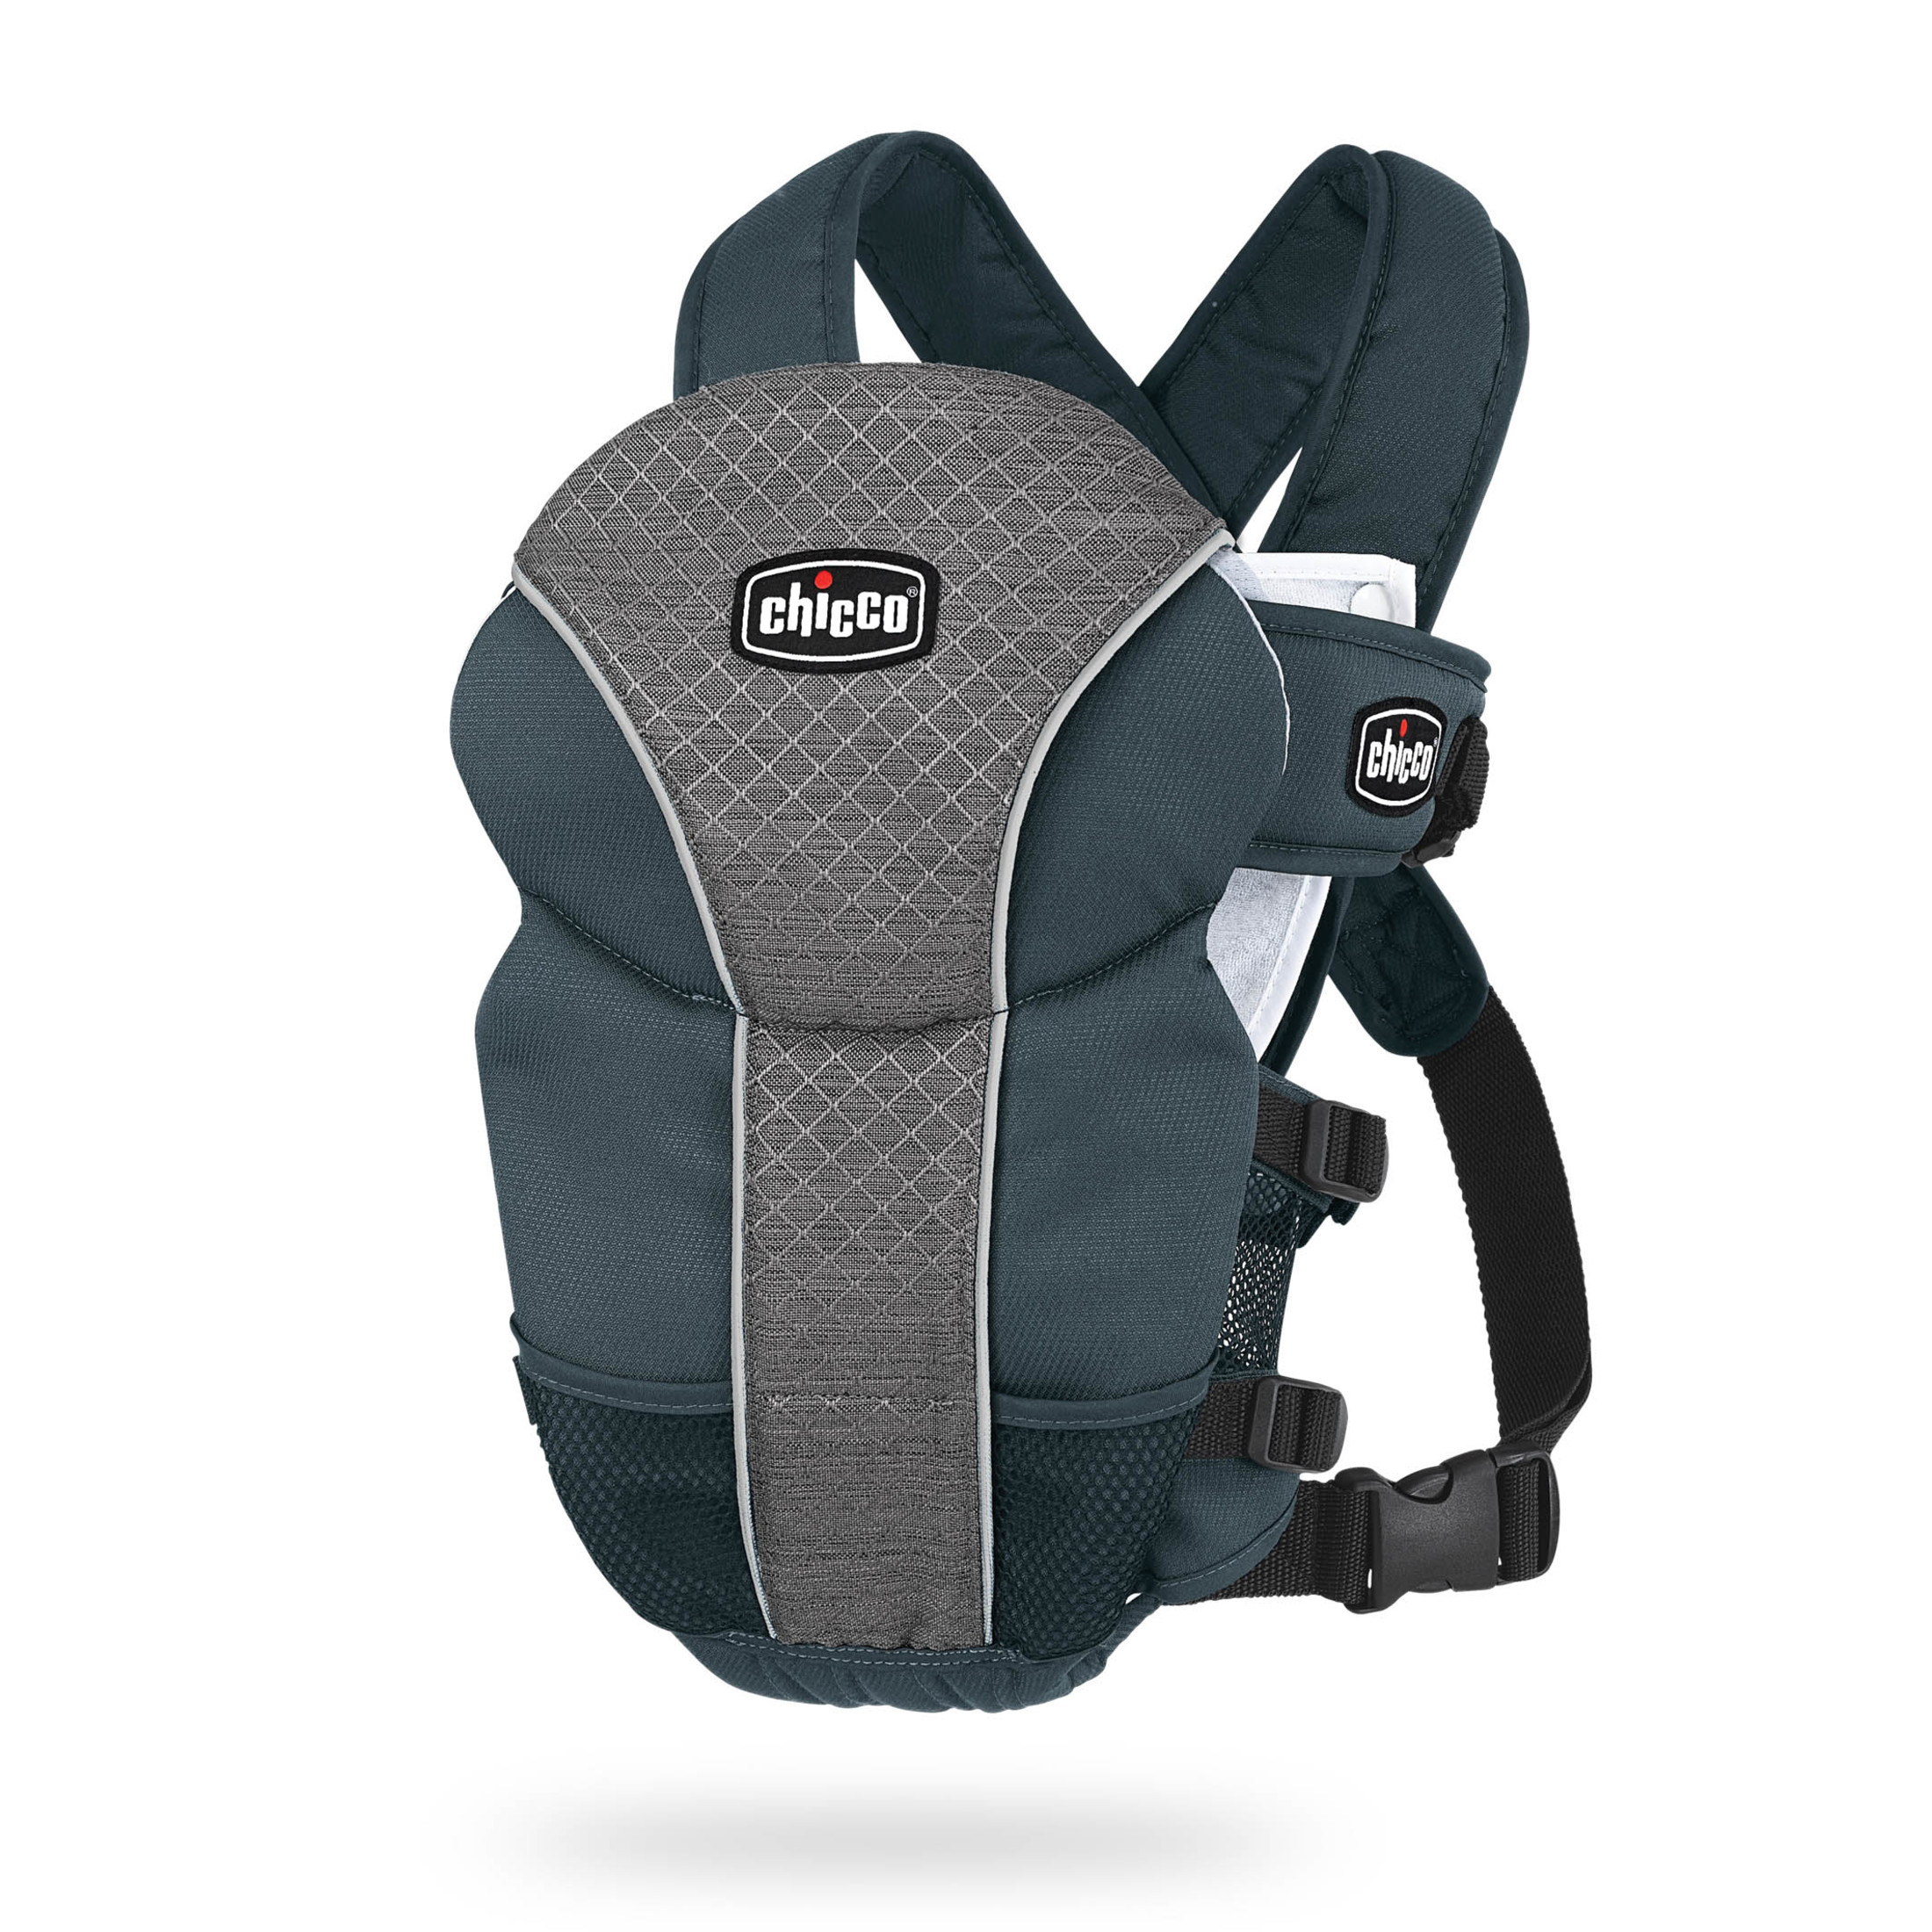 Chicco UltraSoft Infant Carrier - Poetic () - image 1 of 8